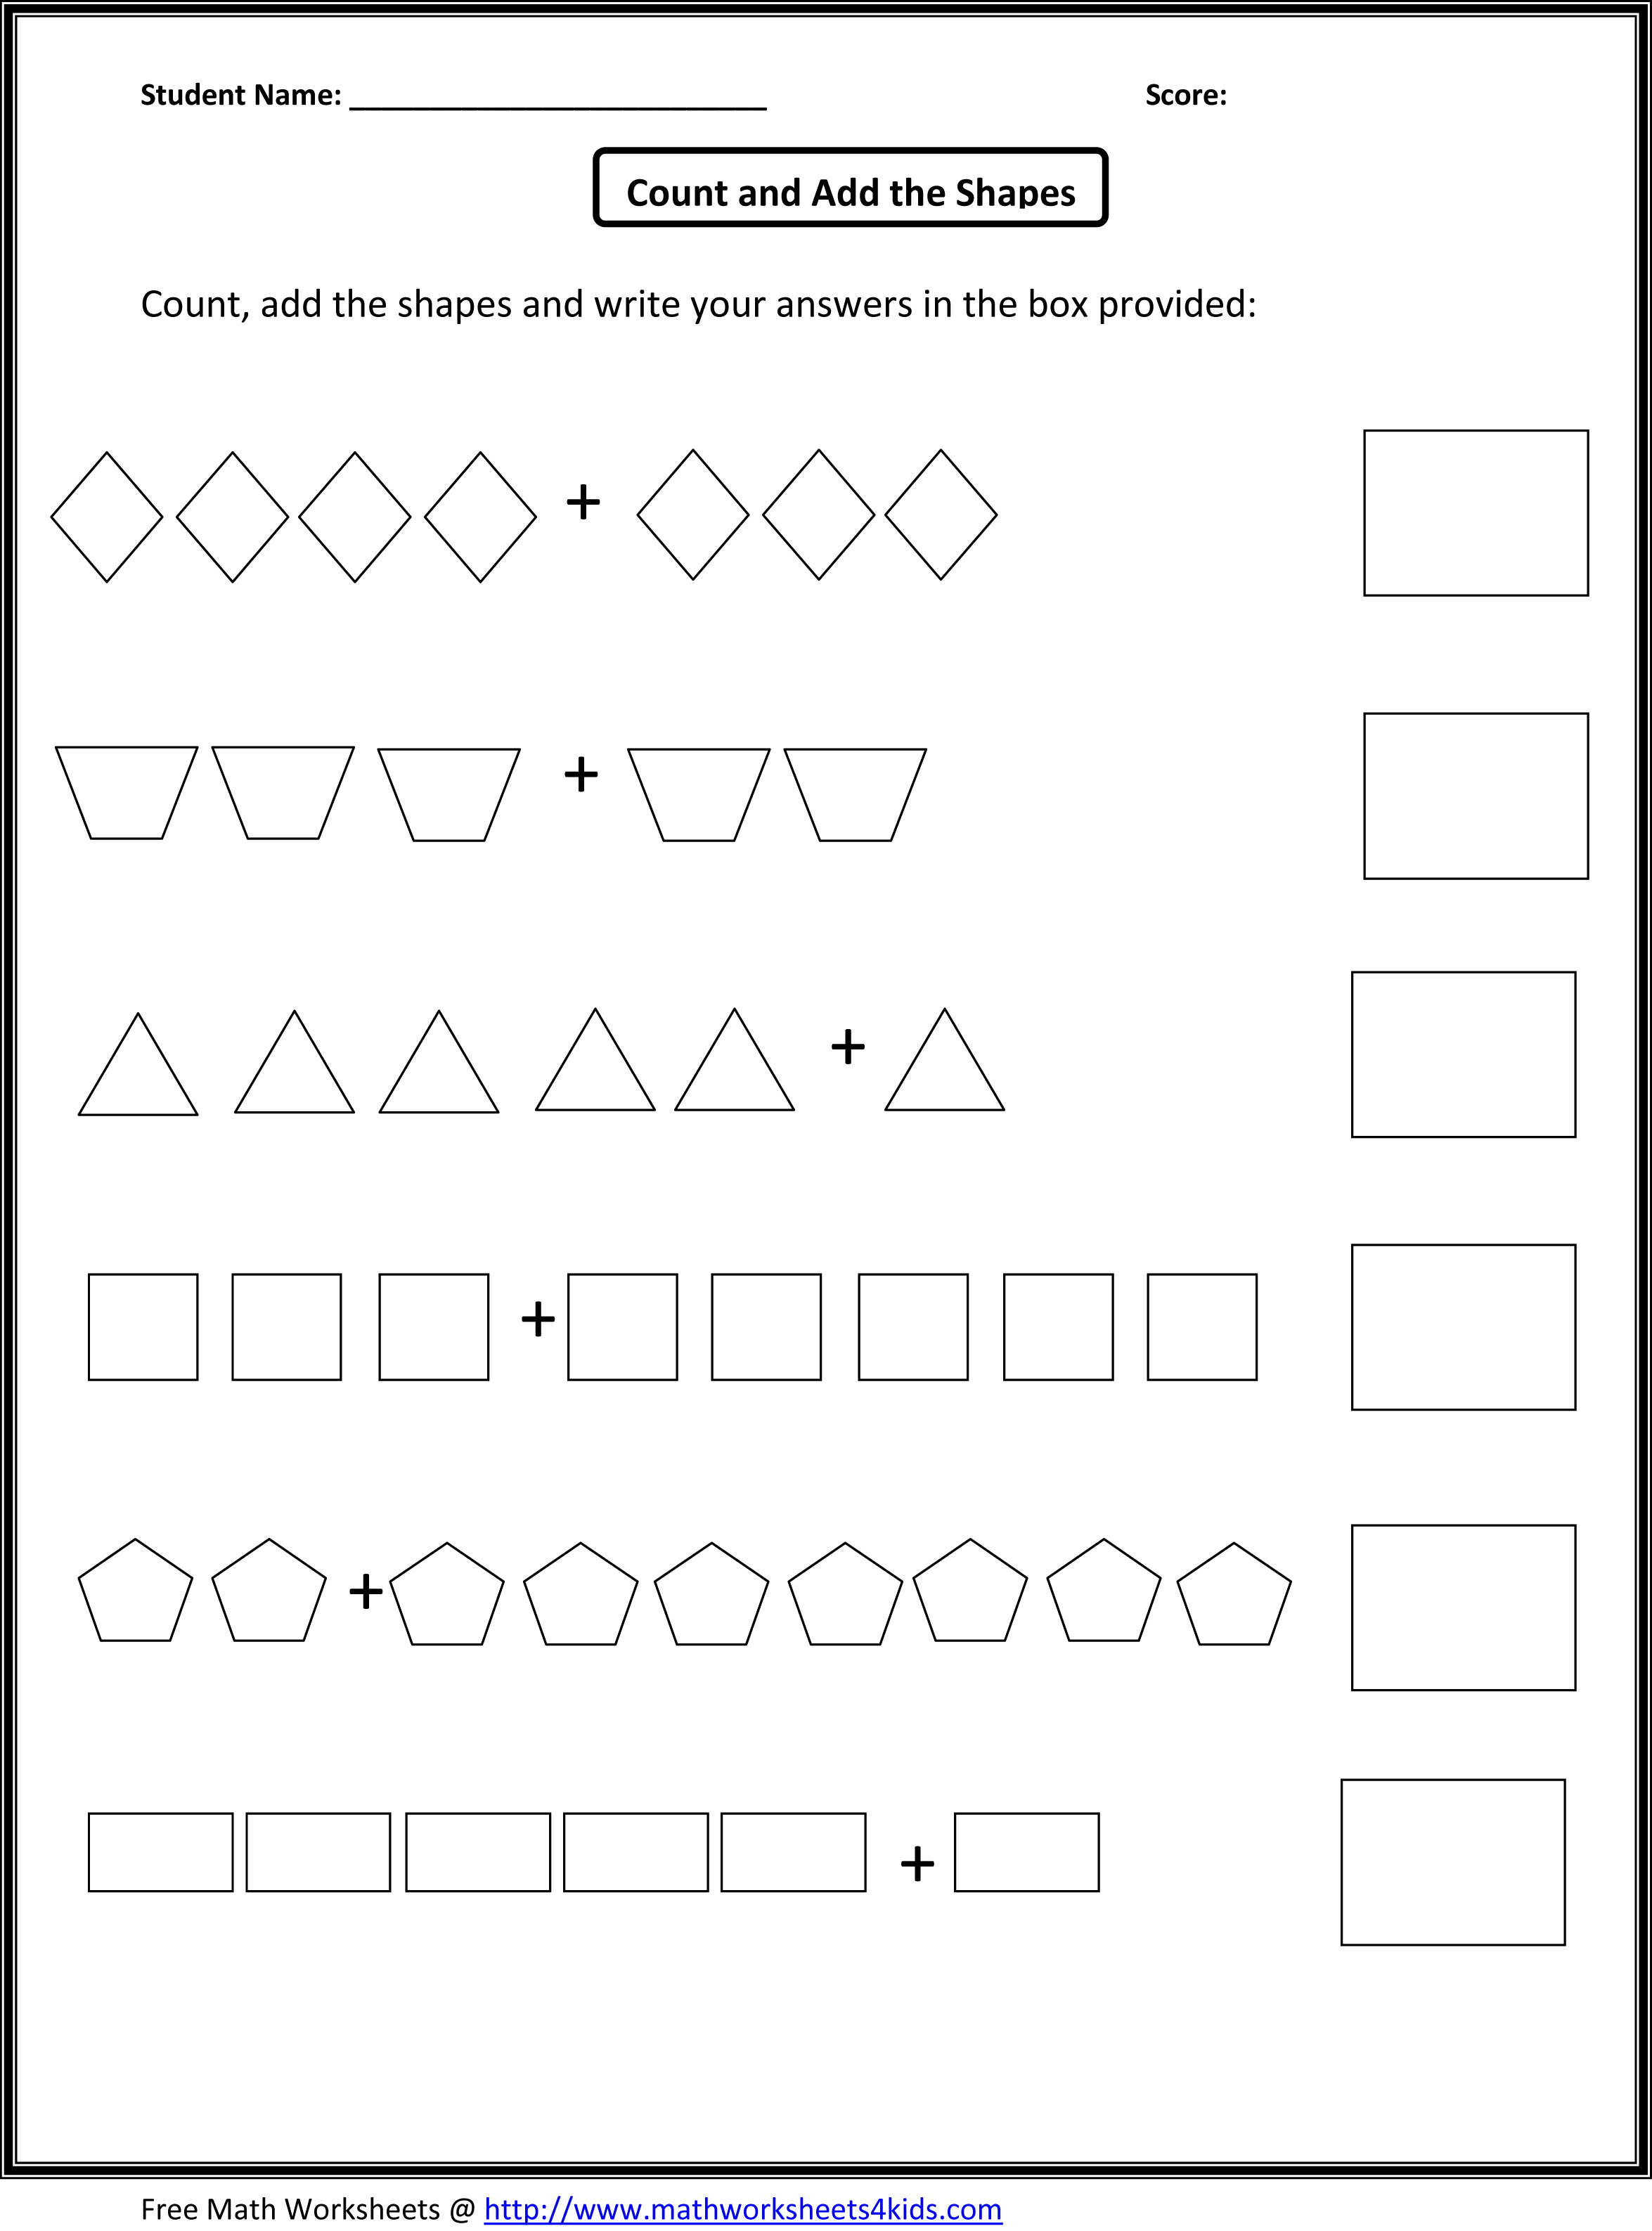 13 Best Images of Kindergarten Worksheets Counting To 15 - Counting by